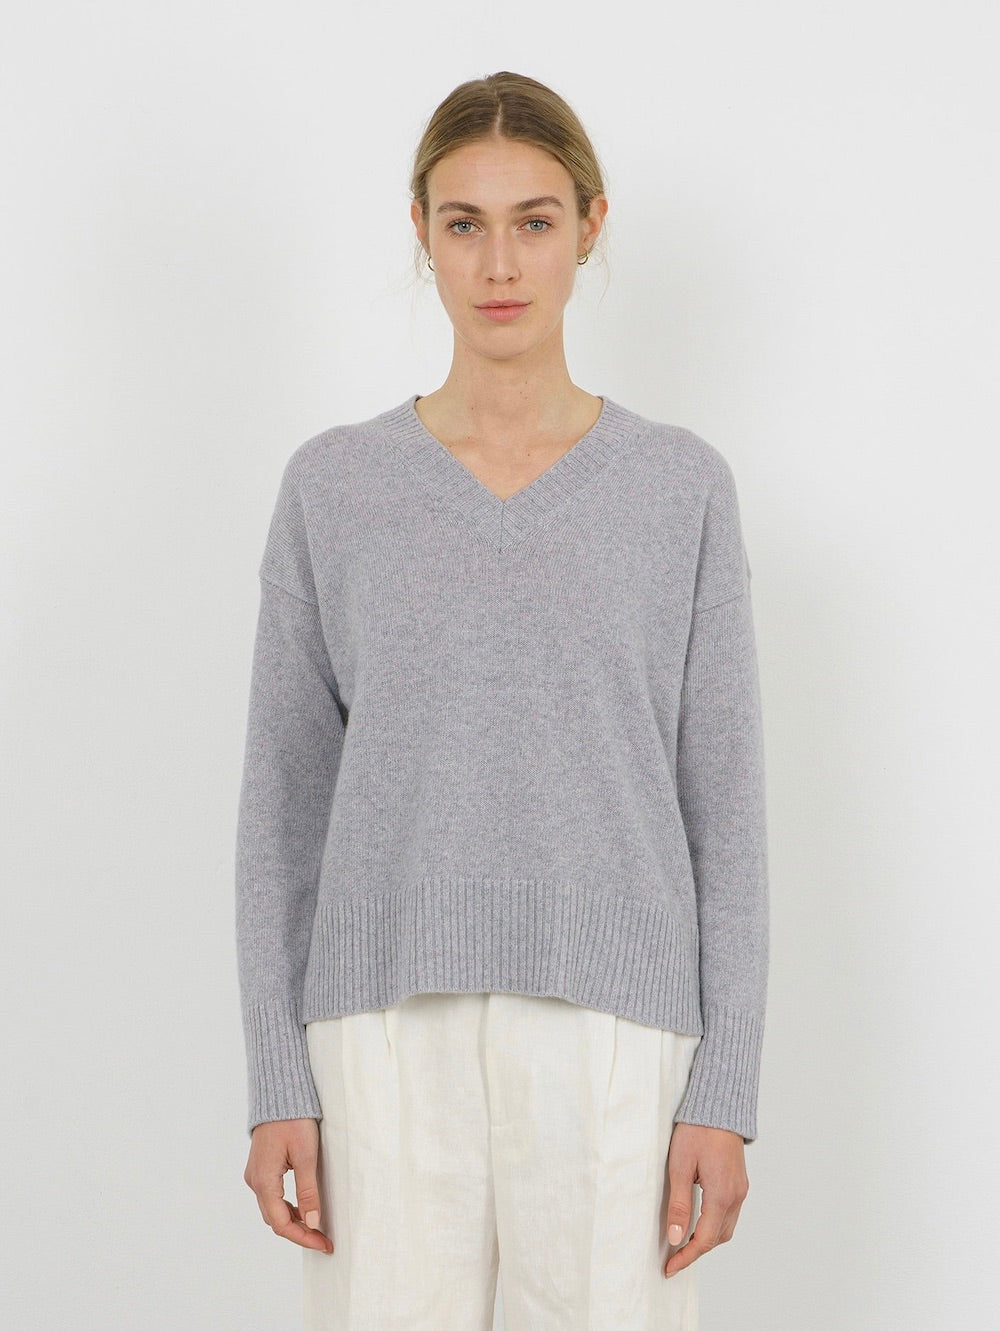 VALERIE SWEATER IN OYSTER GREY